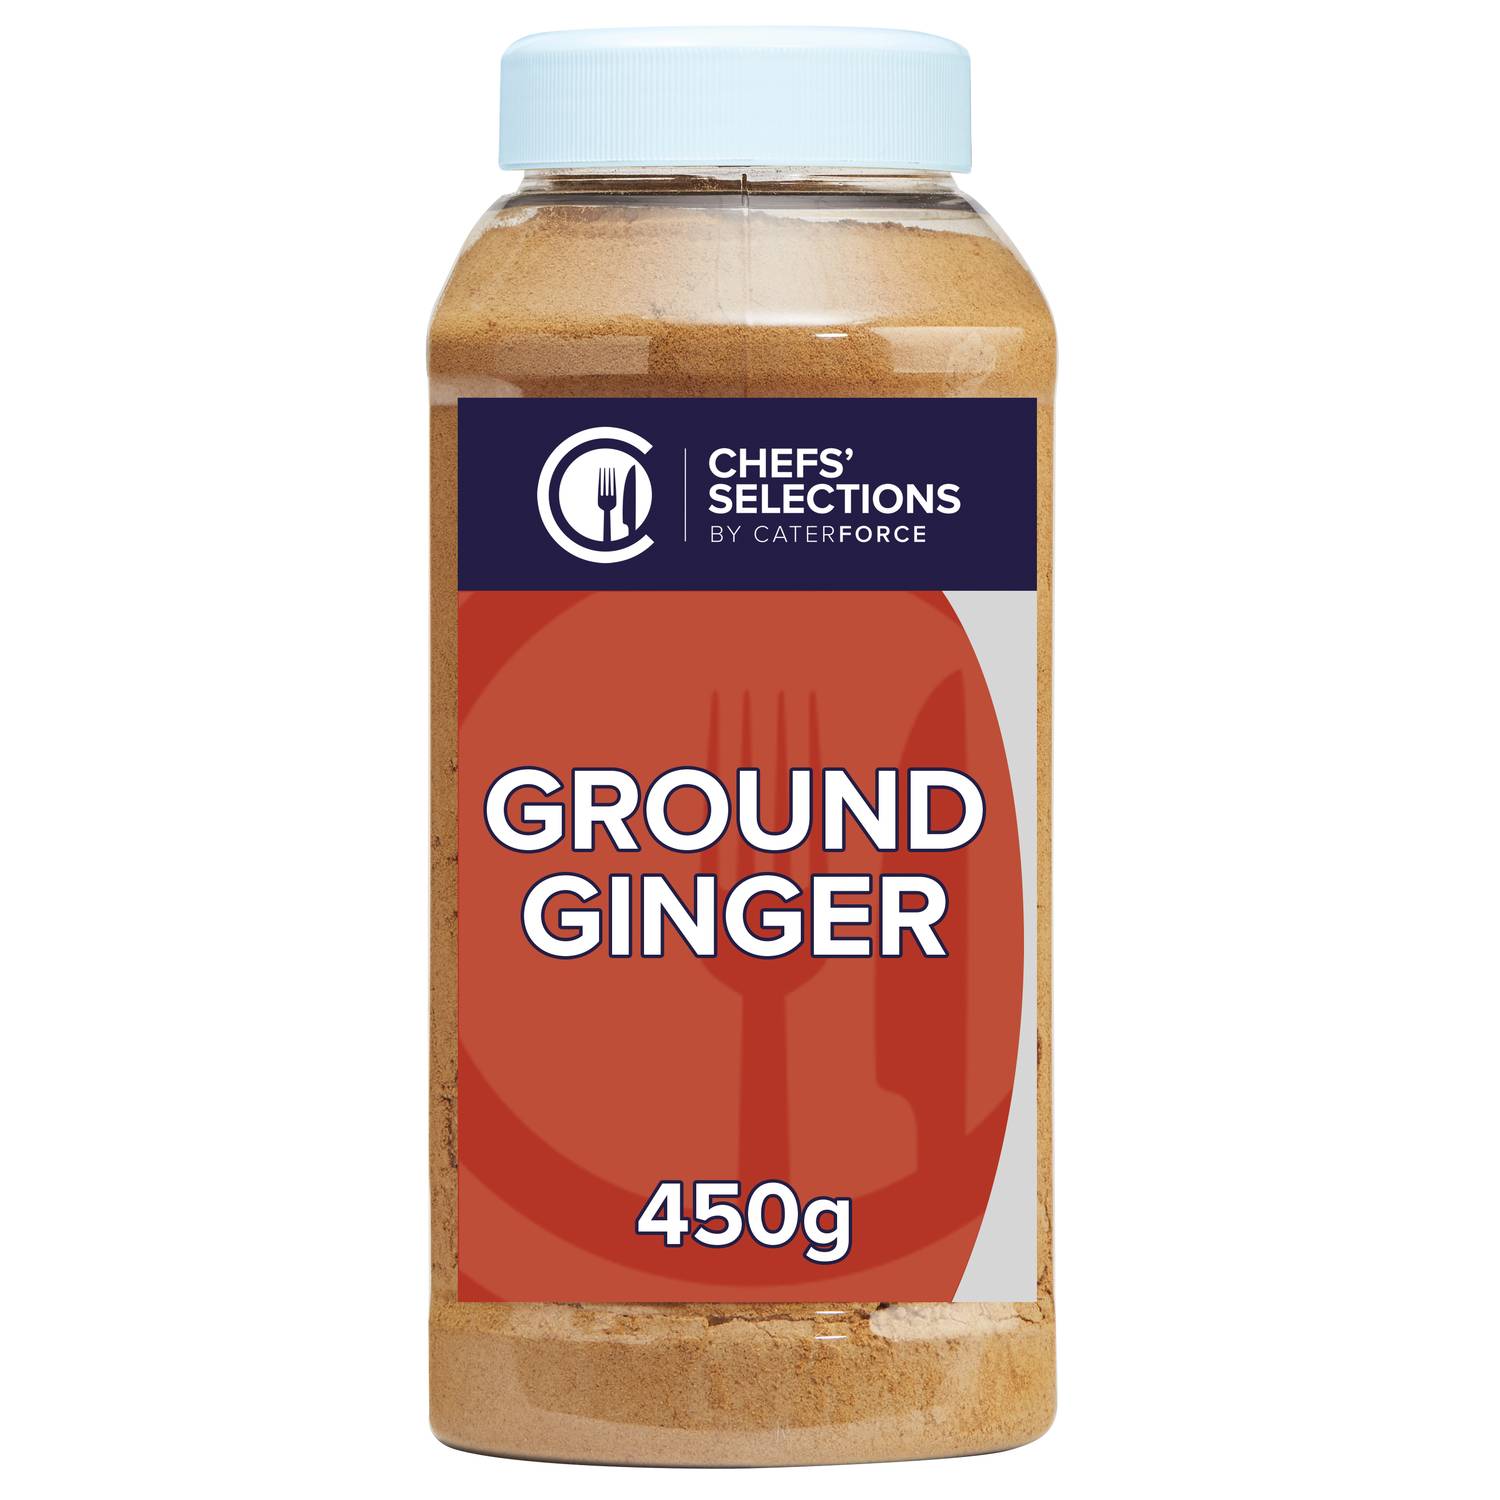 Chefs’ Selections Ground Ginger (6 x 450g)